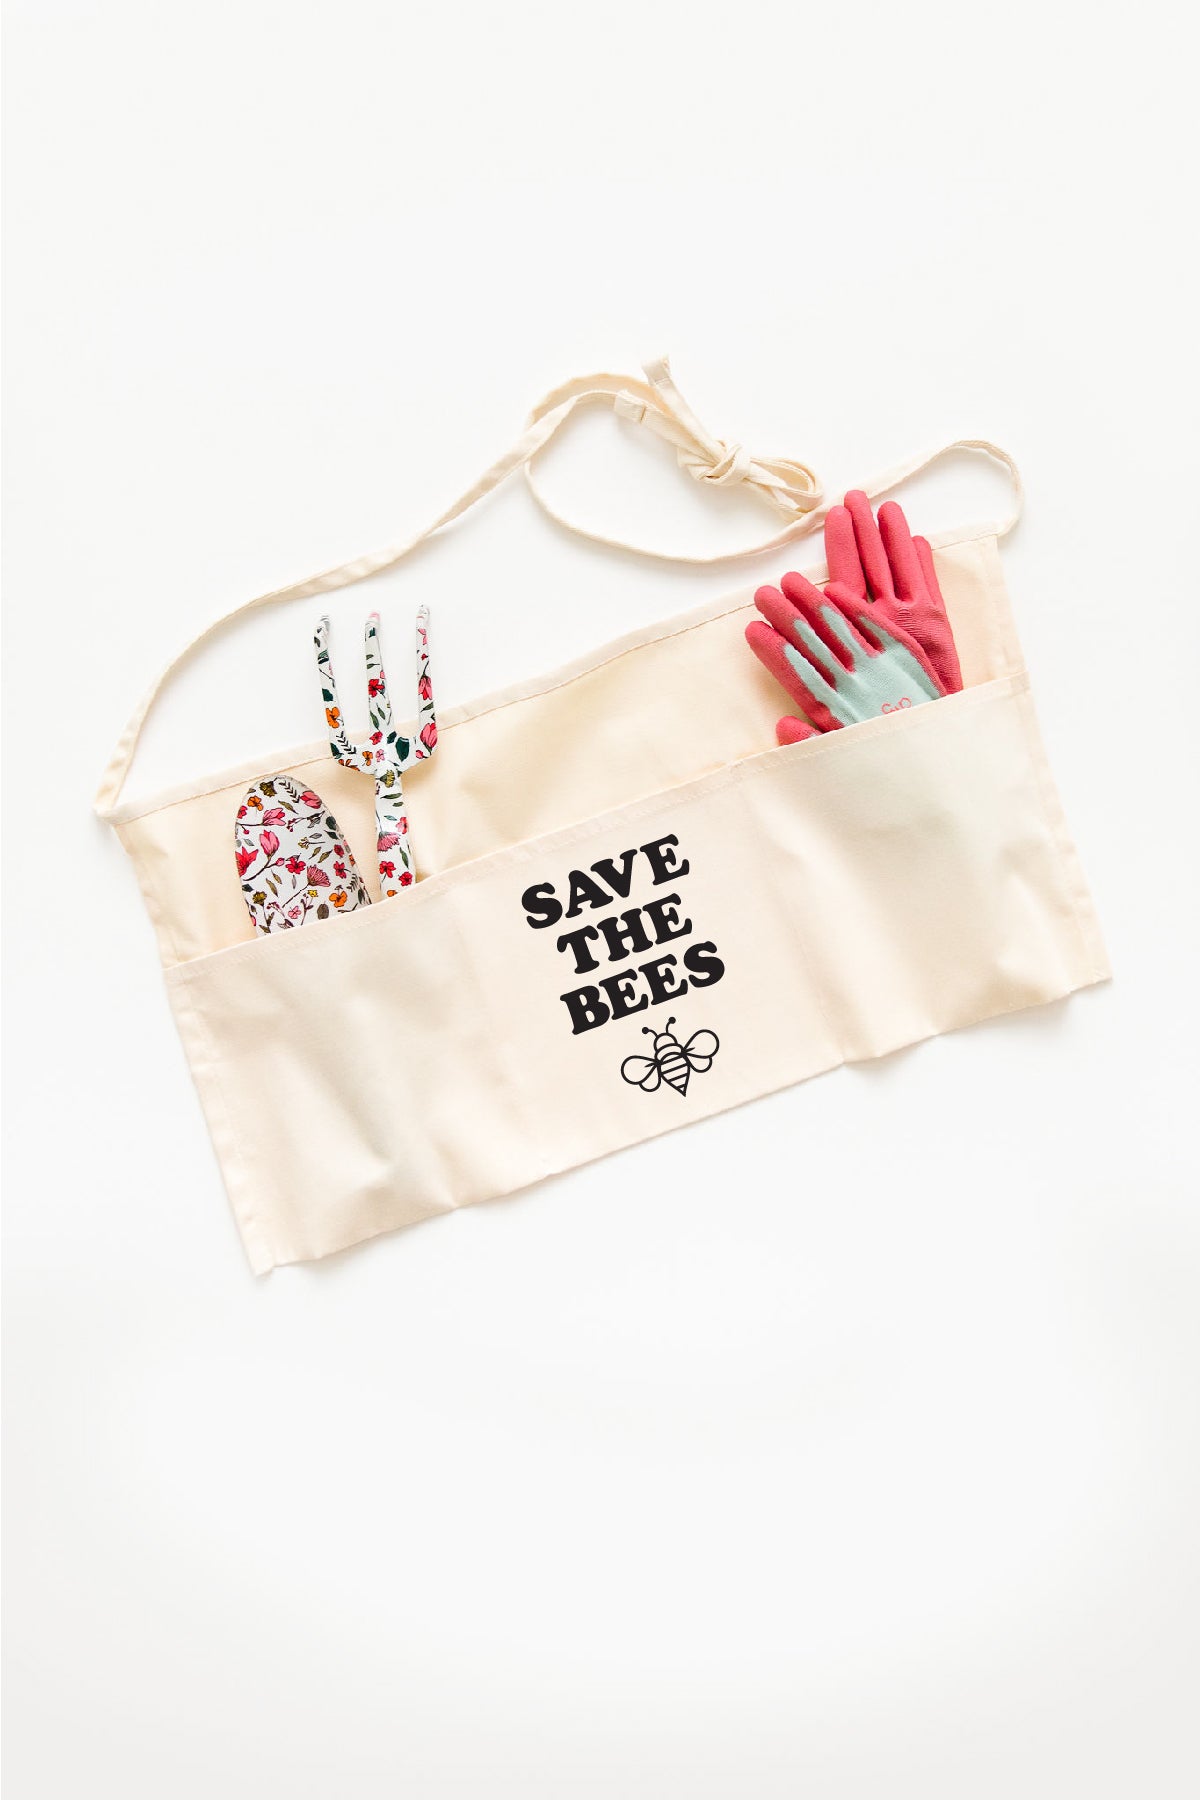 Save the Bees - Adult Waist Apron